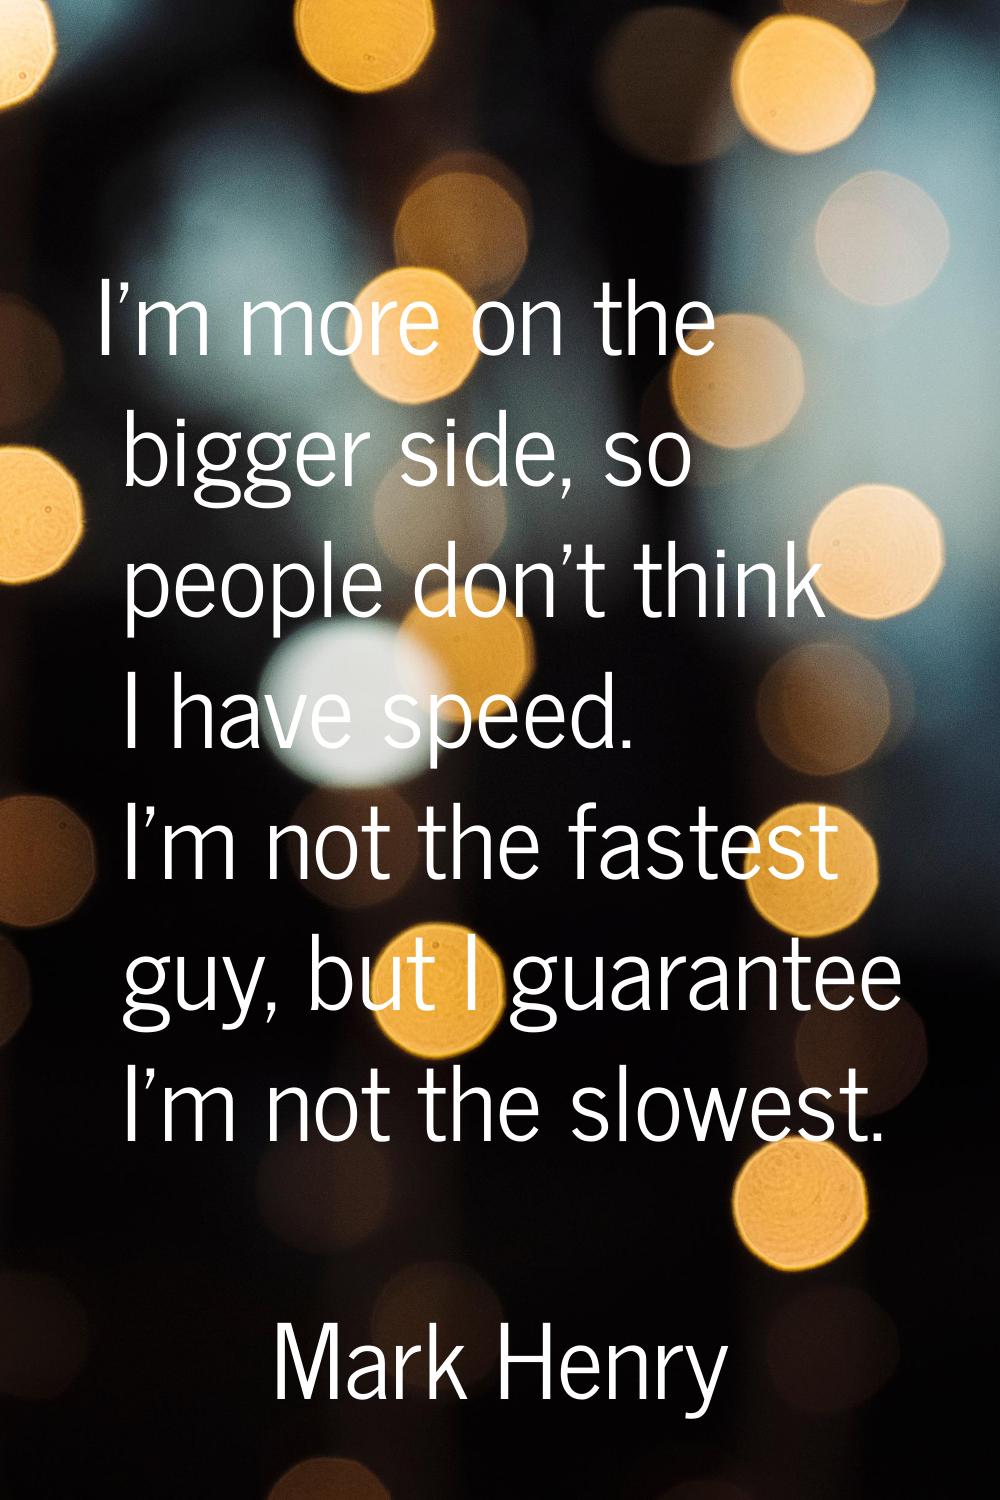 I'm more on the bigger side, so people don't think I have speed. I'm not the fastest guy, but I gua